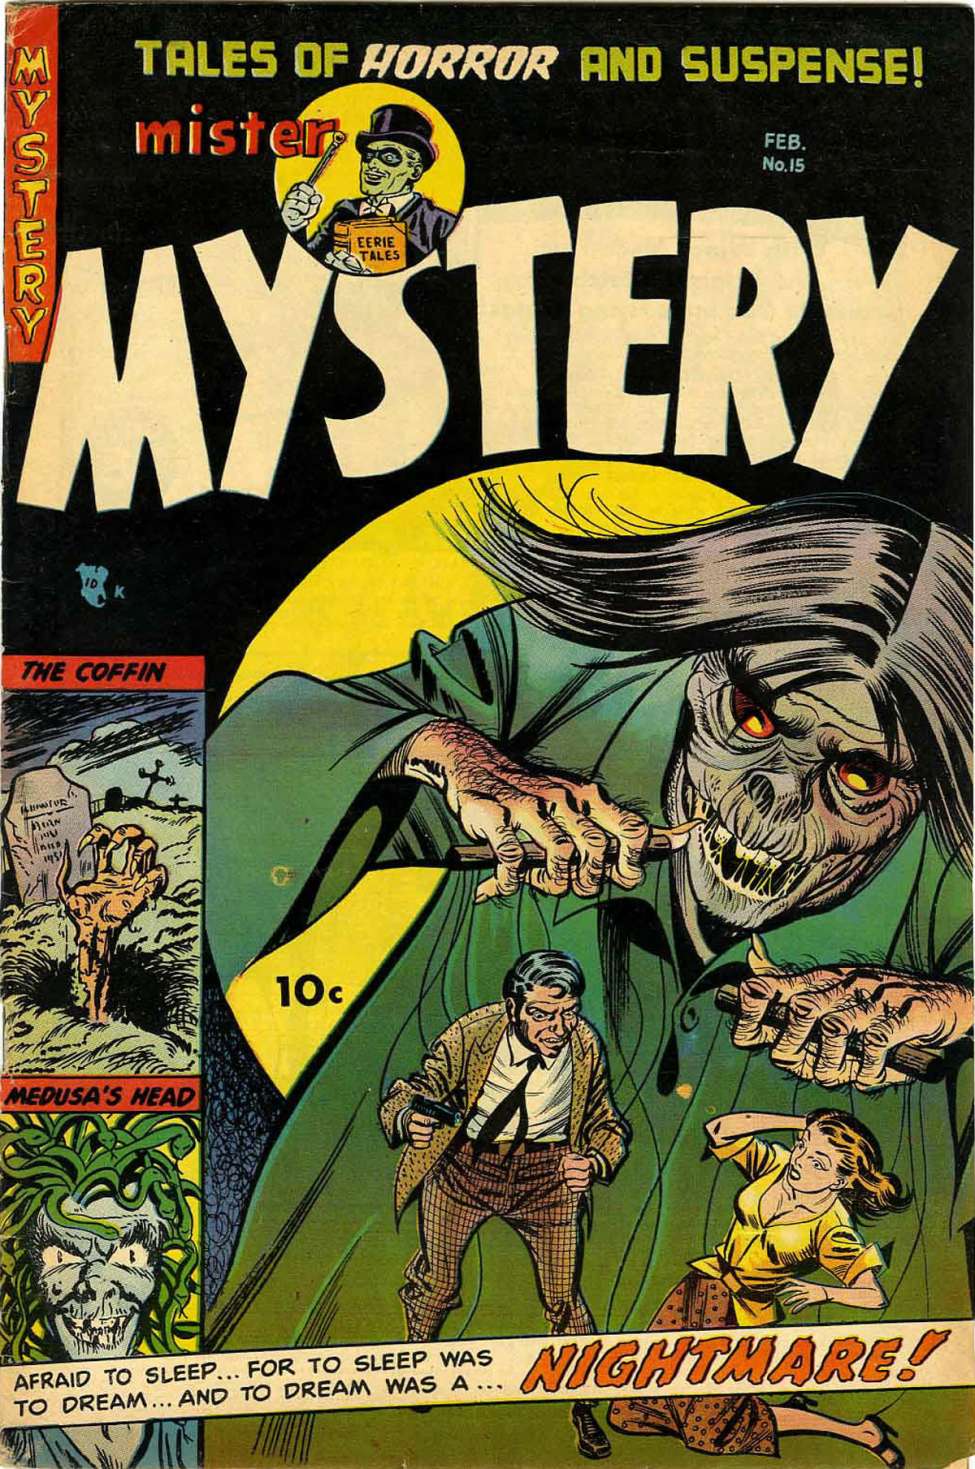 Book Cover For Mister Mystery 15 - Version 1